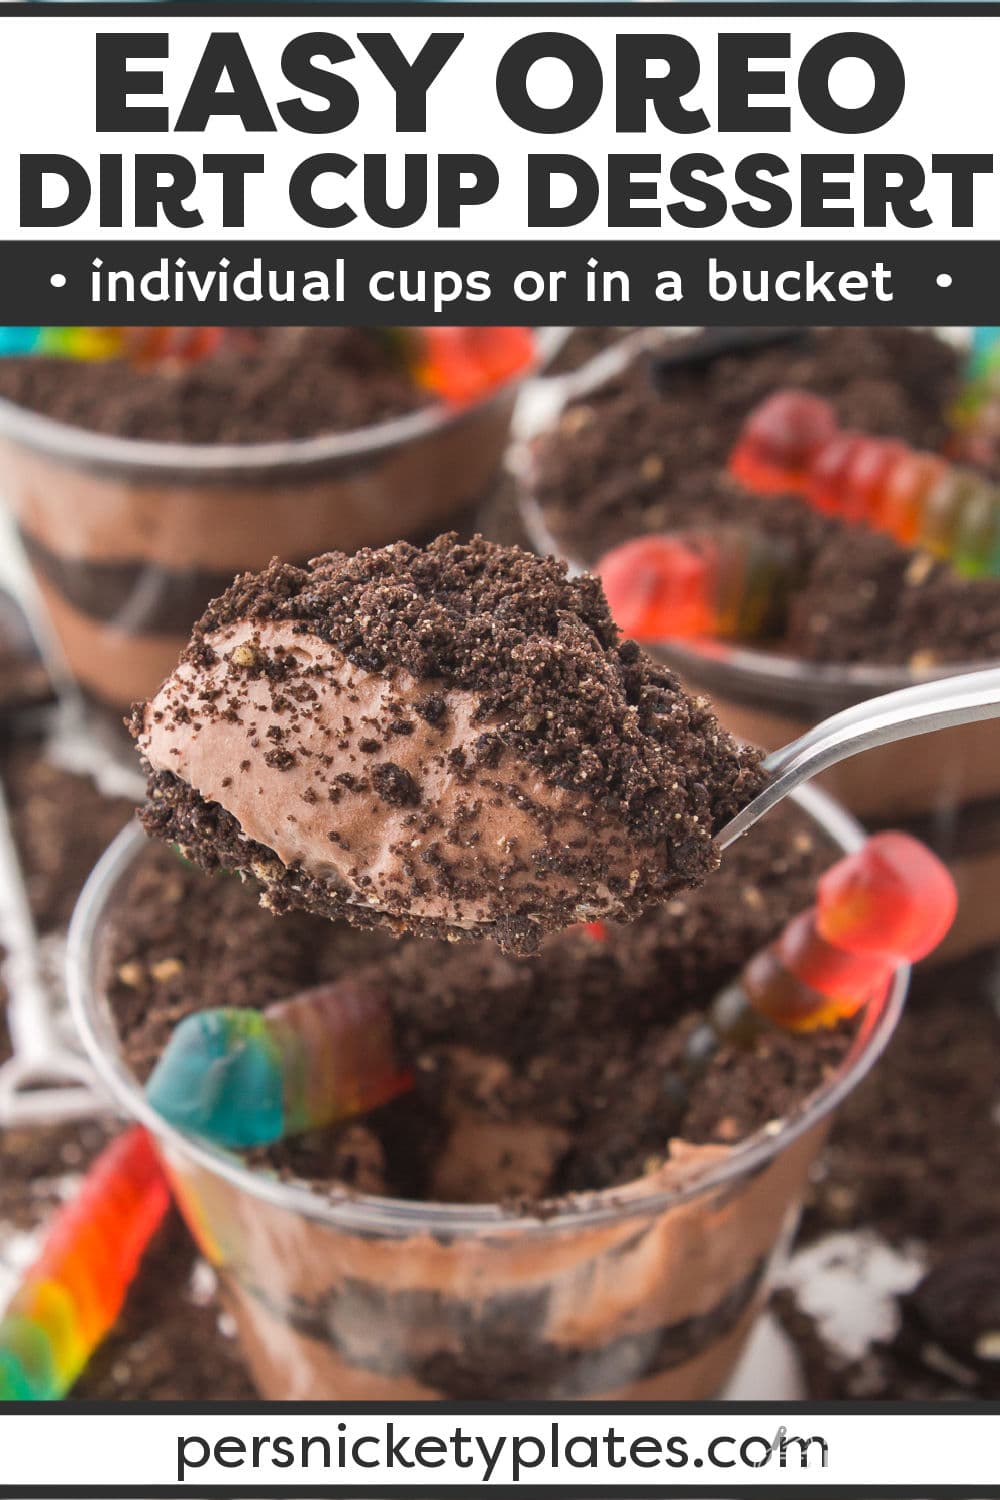 Dirt cup dessert is a fun way to serve a rich, creamy, chocolate pudding! Much like a trifle or parfait, it is layered with crushed Oreo cookies to look like dirt then finished with gummy worms on top! It's a fun and festive dessert that everyone loves. Serve it in individual cups or a bucket for added effect! | www.persnicketyplates.com